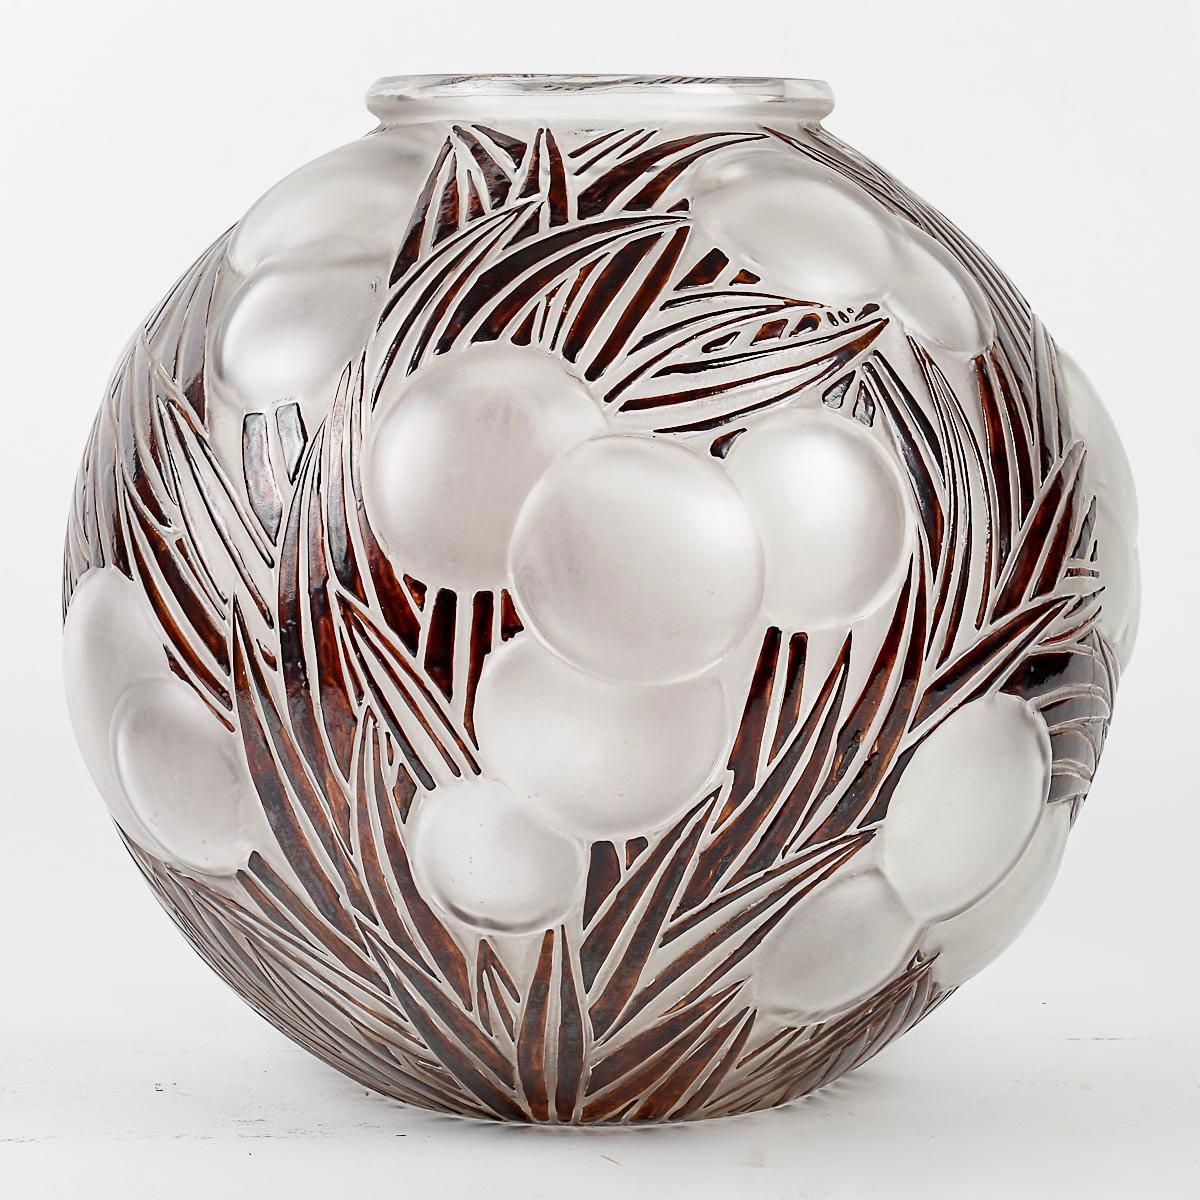 Vase “Oranges” made in frosted glass with original brown heated enamel by René Lalique in 1926 after a drawing by his daughter Suzanne Lalique.
Molded signature.

Perfect condition. Exceptional quality of enamelling. Rarer in brown than in black